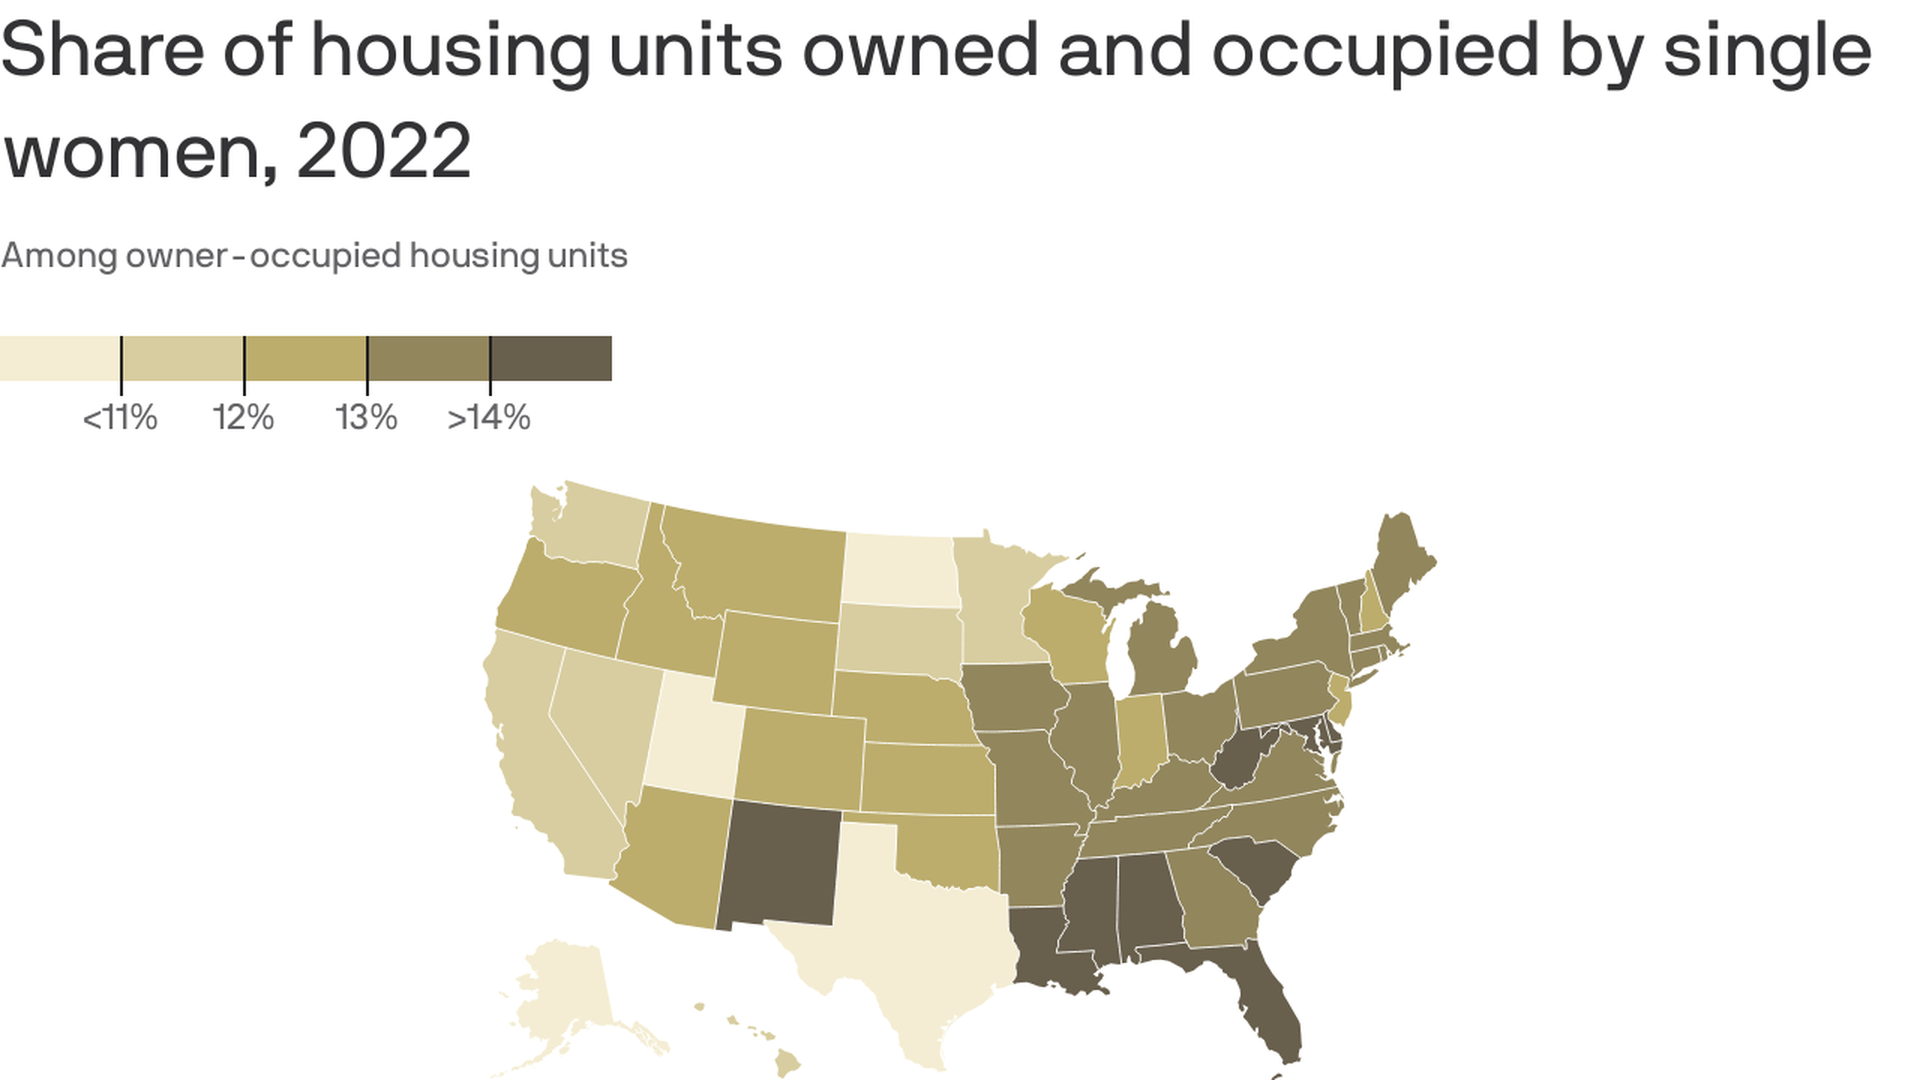 A shaded map of the U.S. depicting the share of housing units owned and occupied by single women in 2022